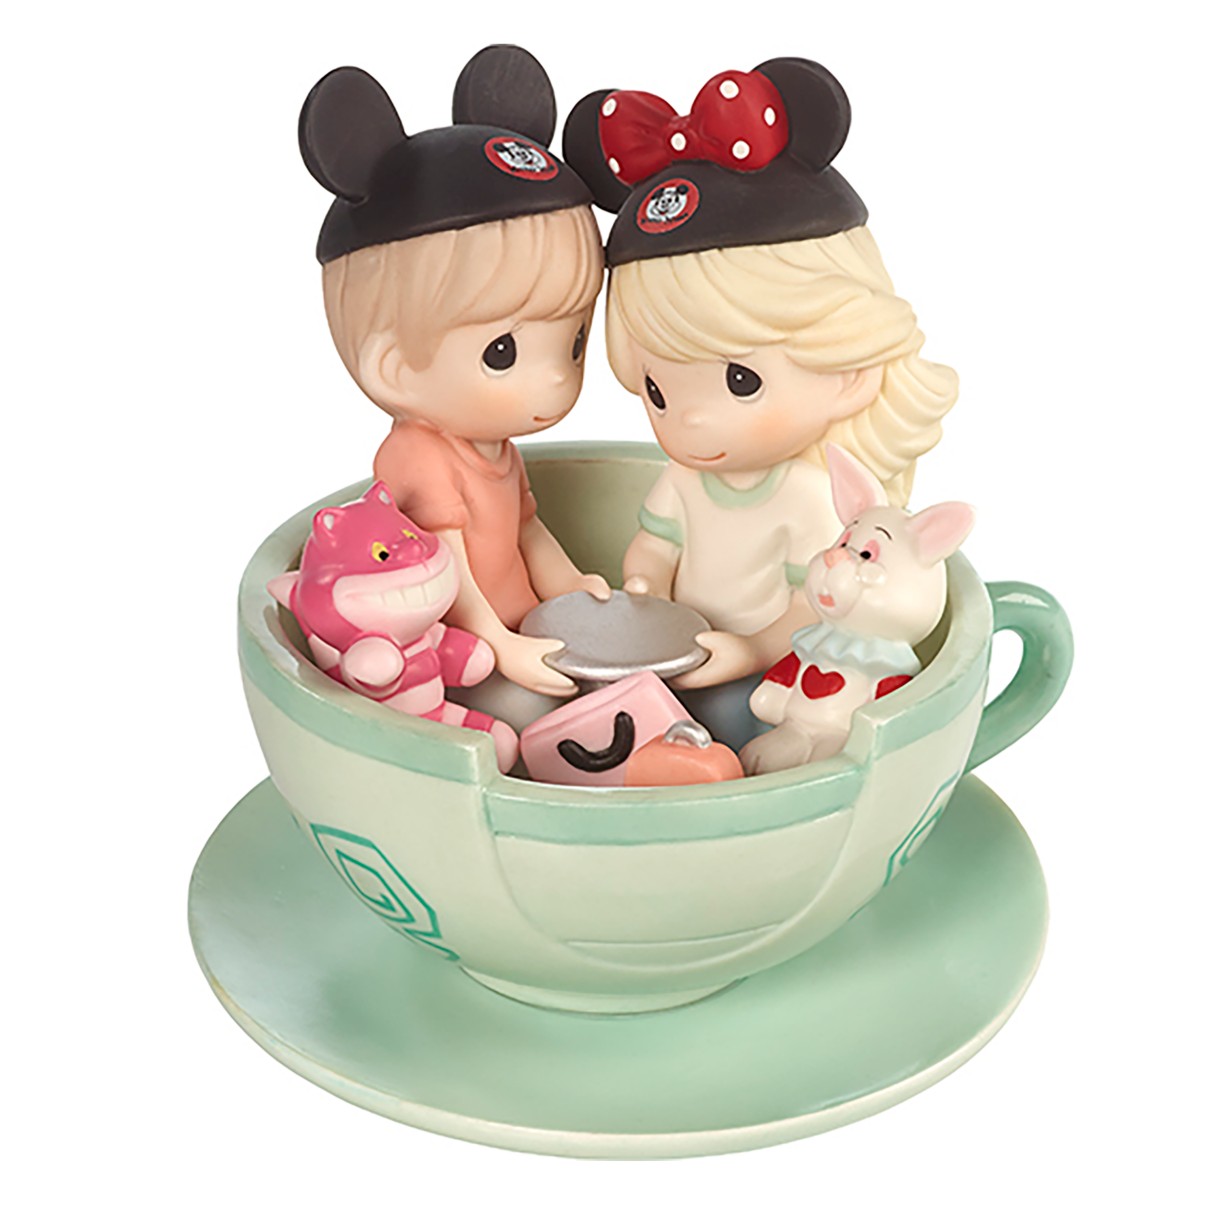 Disney Boy and Girl ''It's a Tea-riffic Day to Be with You'' Figurine – Precious Moments